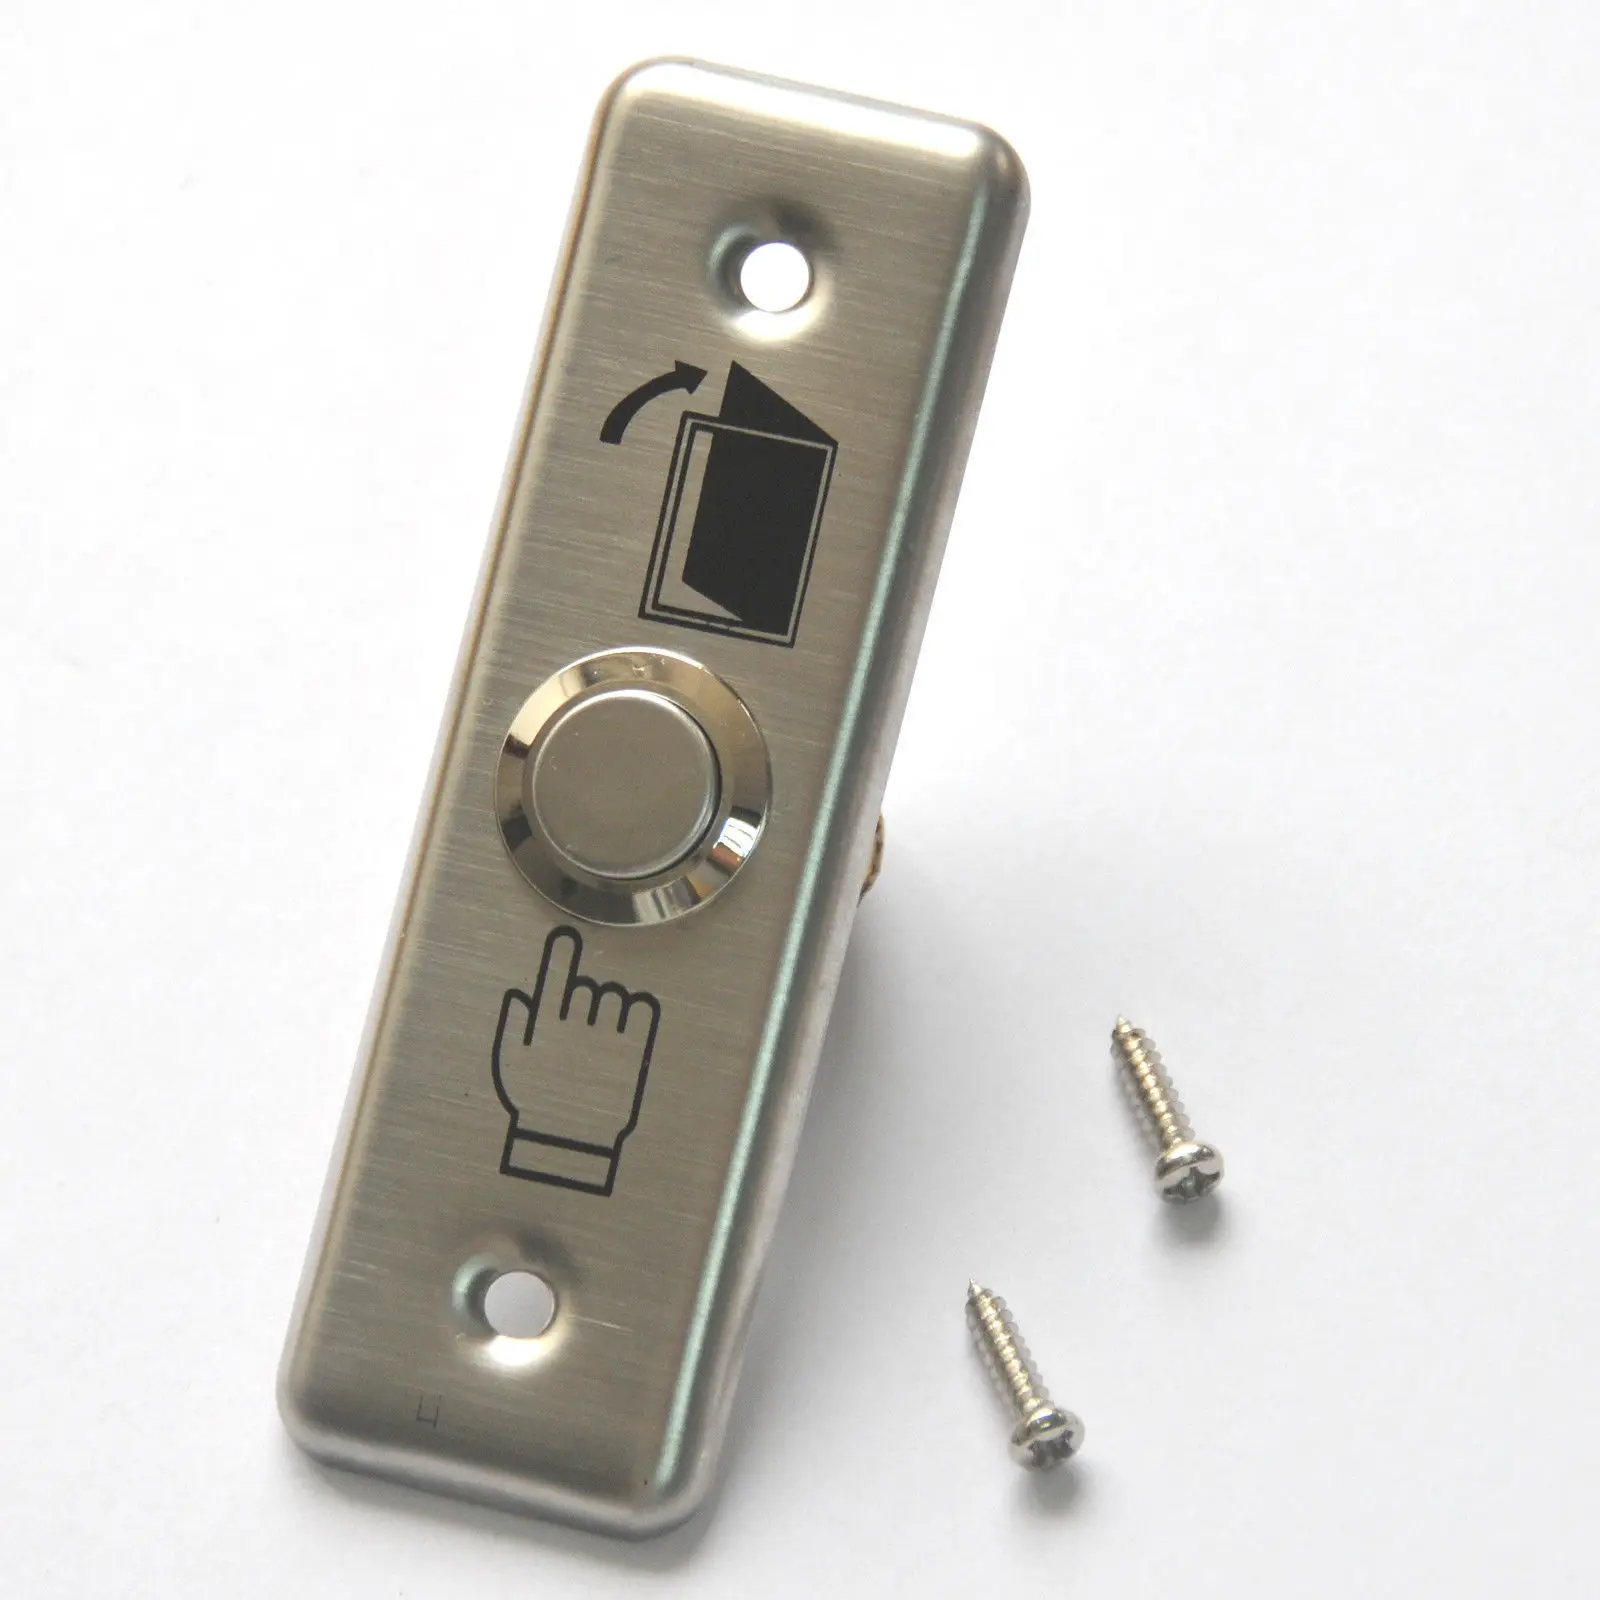 

1set Door Switch Button With Screws Access Control Door Switch Stainless Steel Slim Exit Push Release Button Family Safety Tools